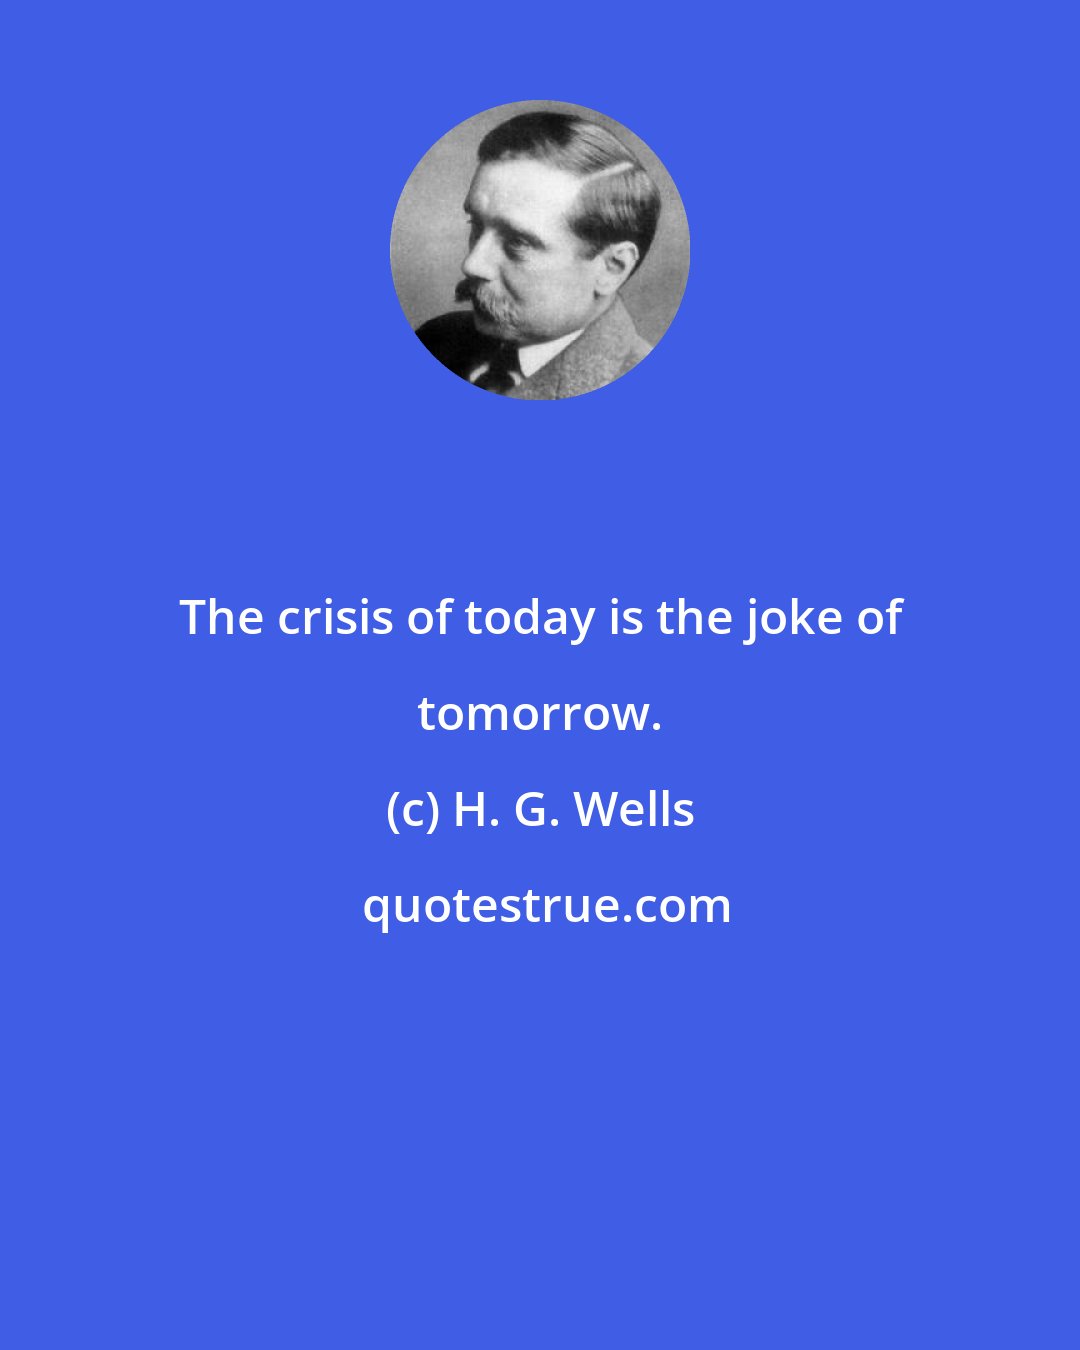 H. G. Wells: The crisis of today is the joke of tomorrow.